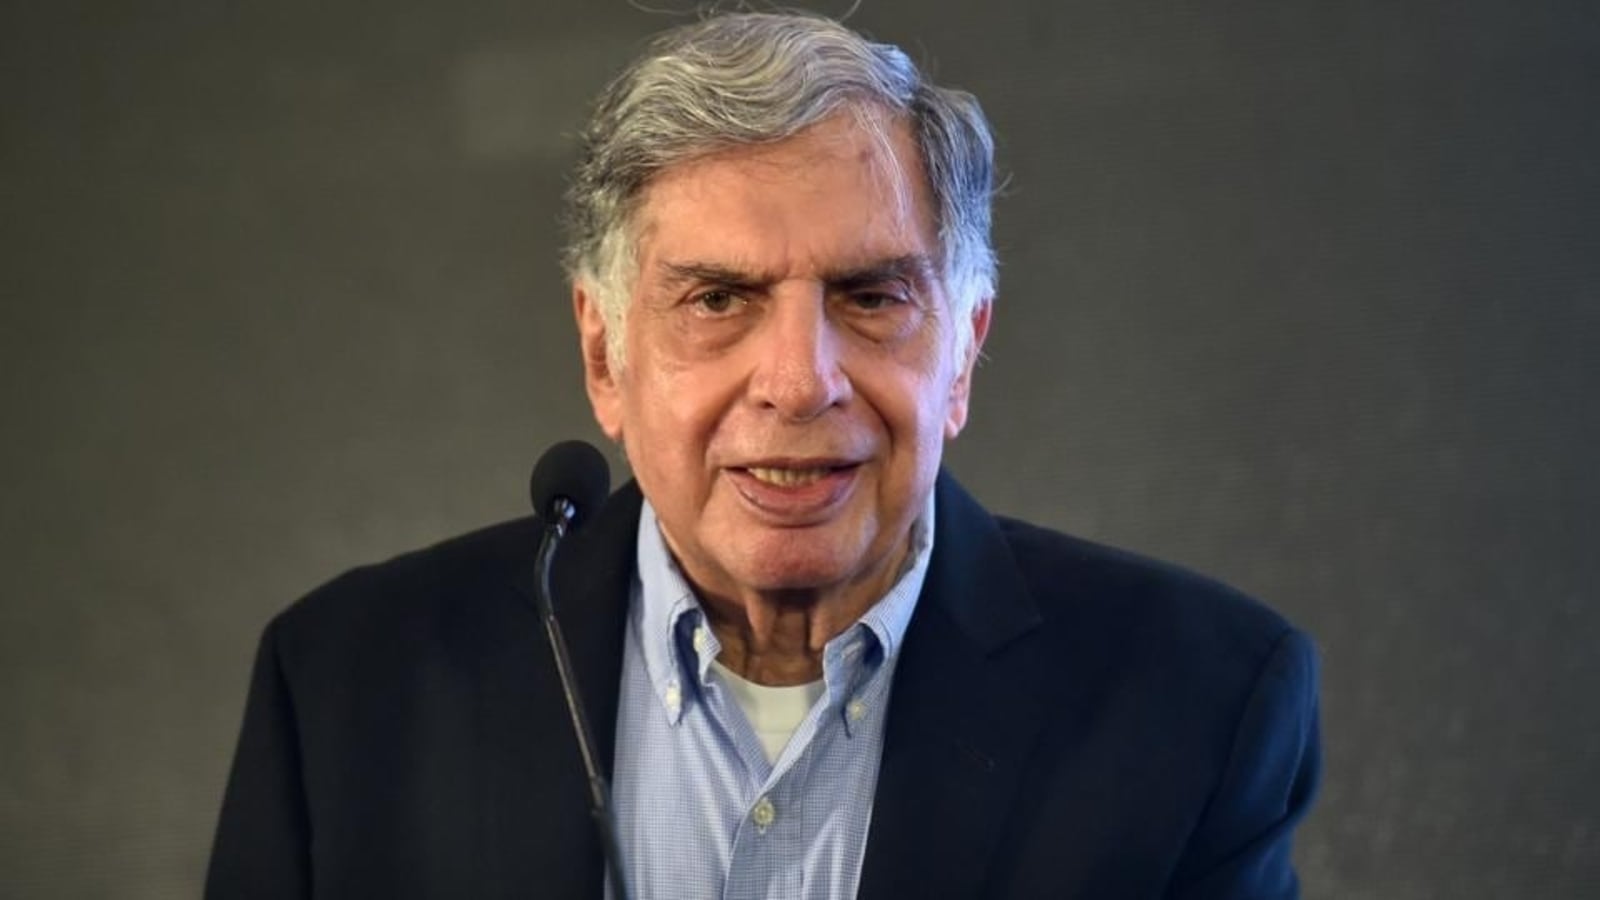 Ratan Tata backs startup that connects senior citizens with young graduates  - Hindustan Times